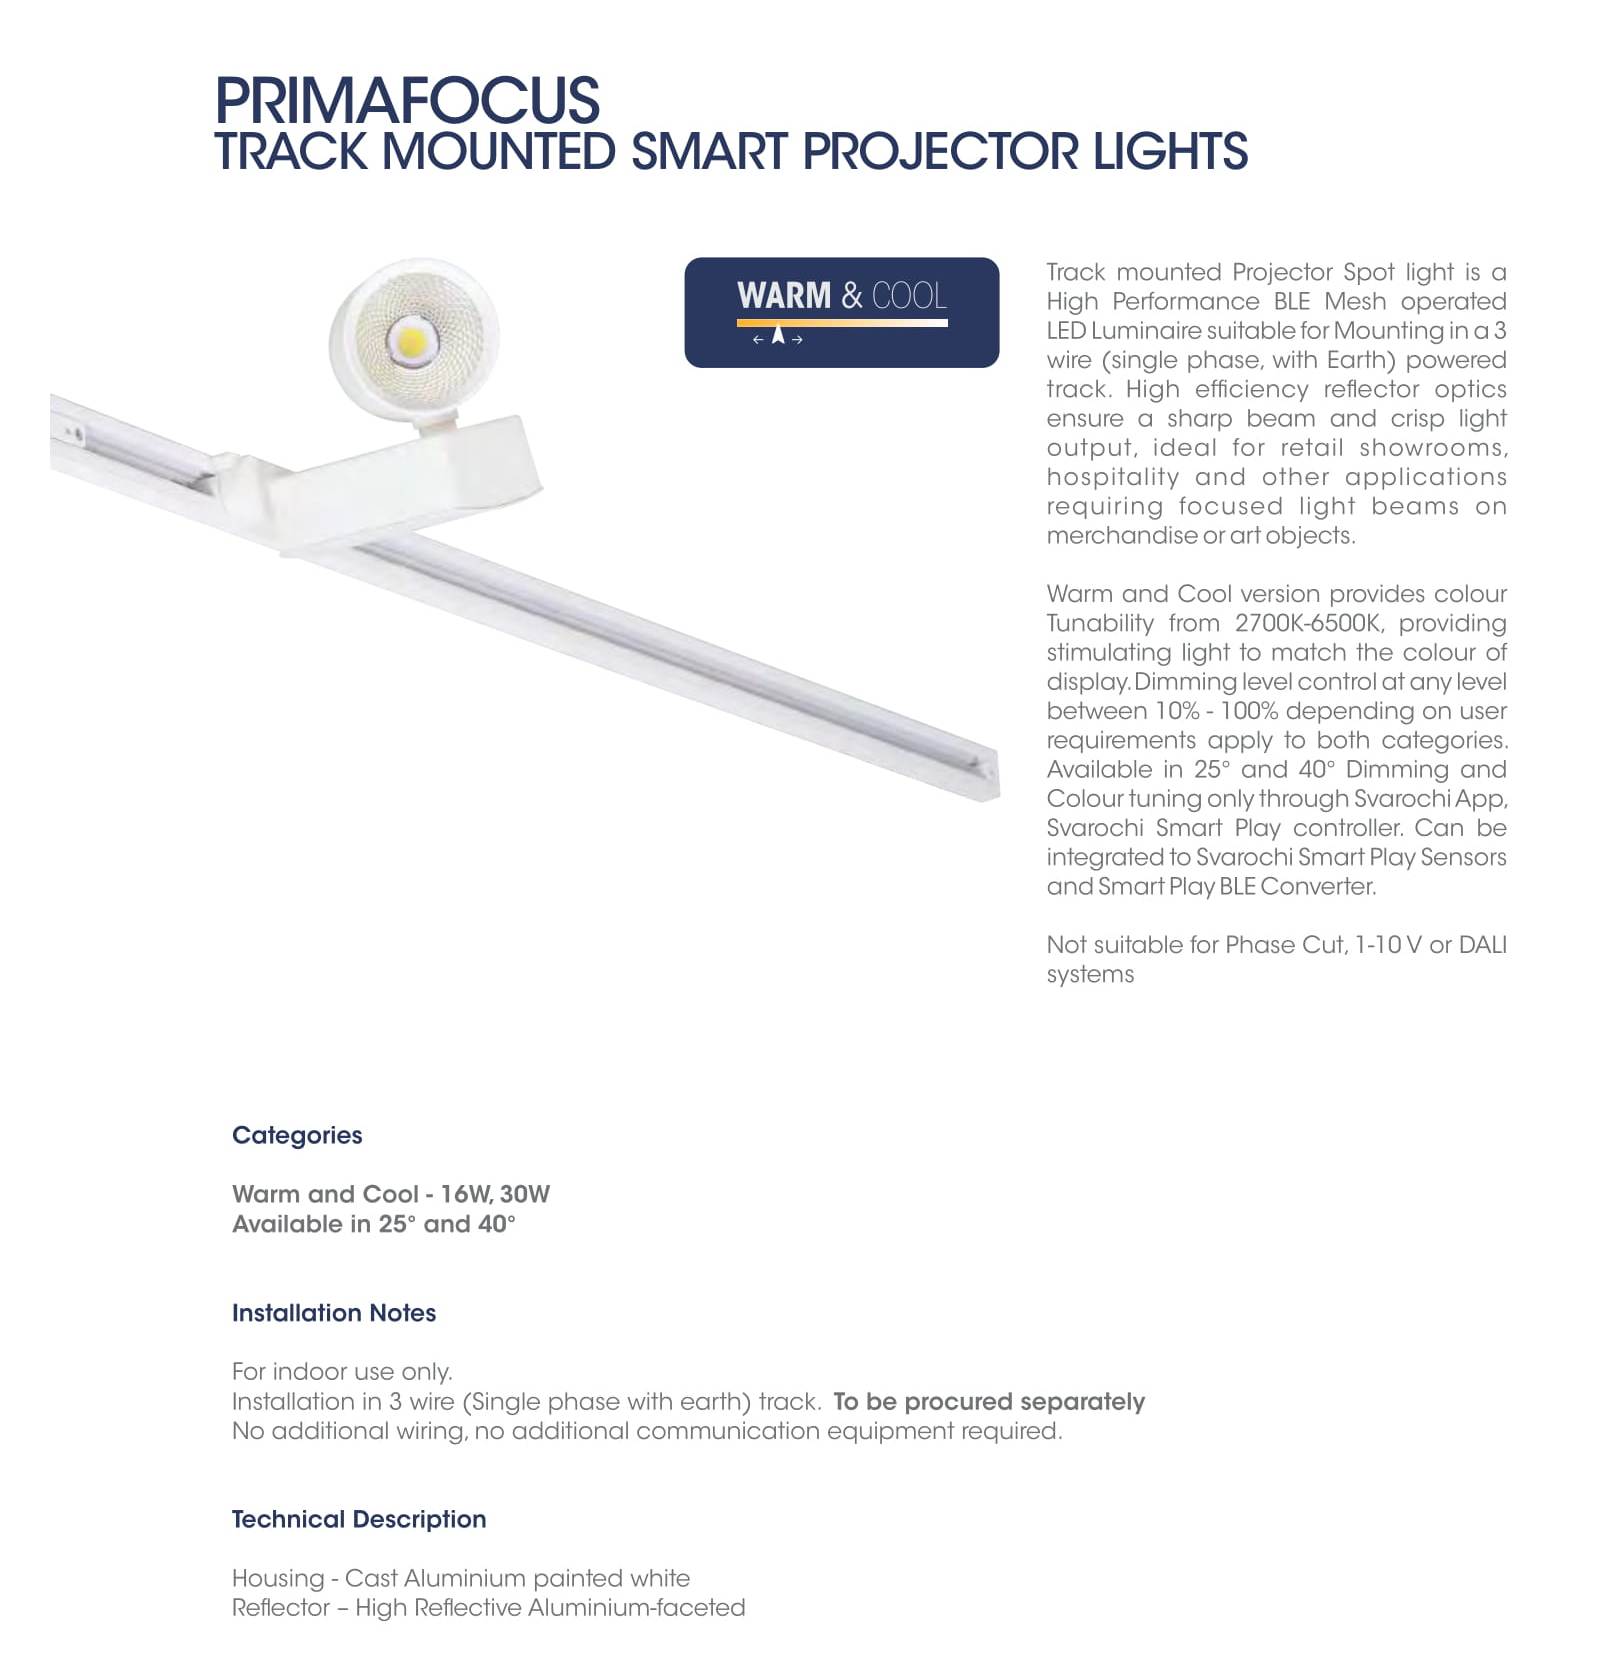 Primafocus Track Mounted Smart Projector Lights